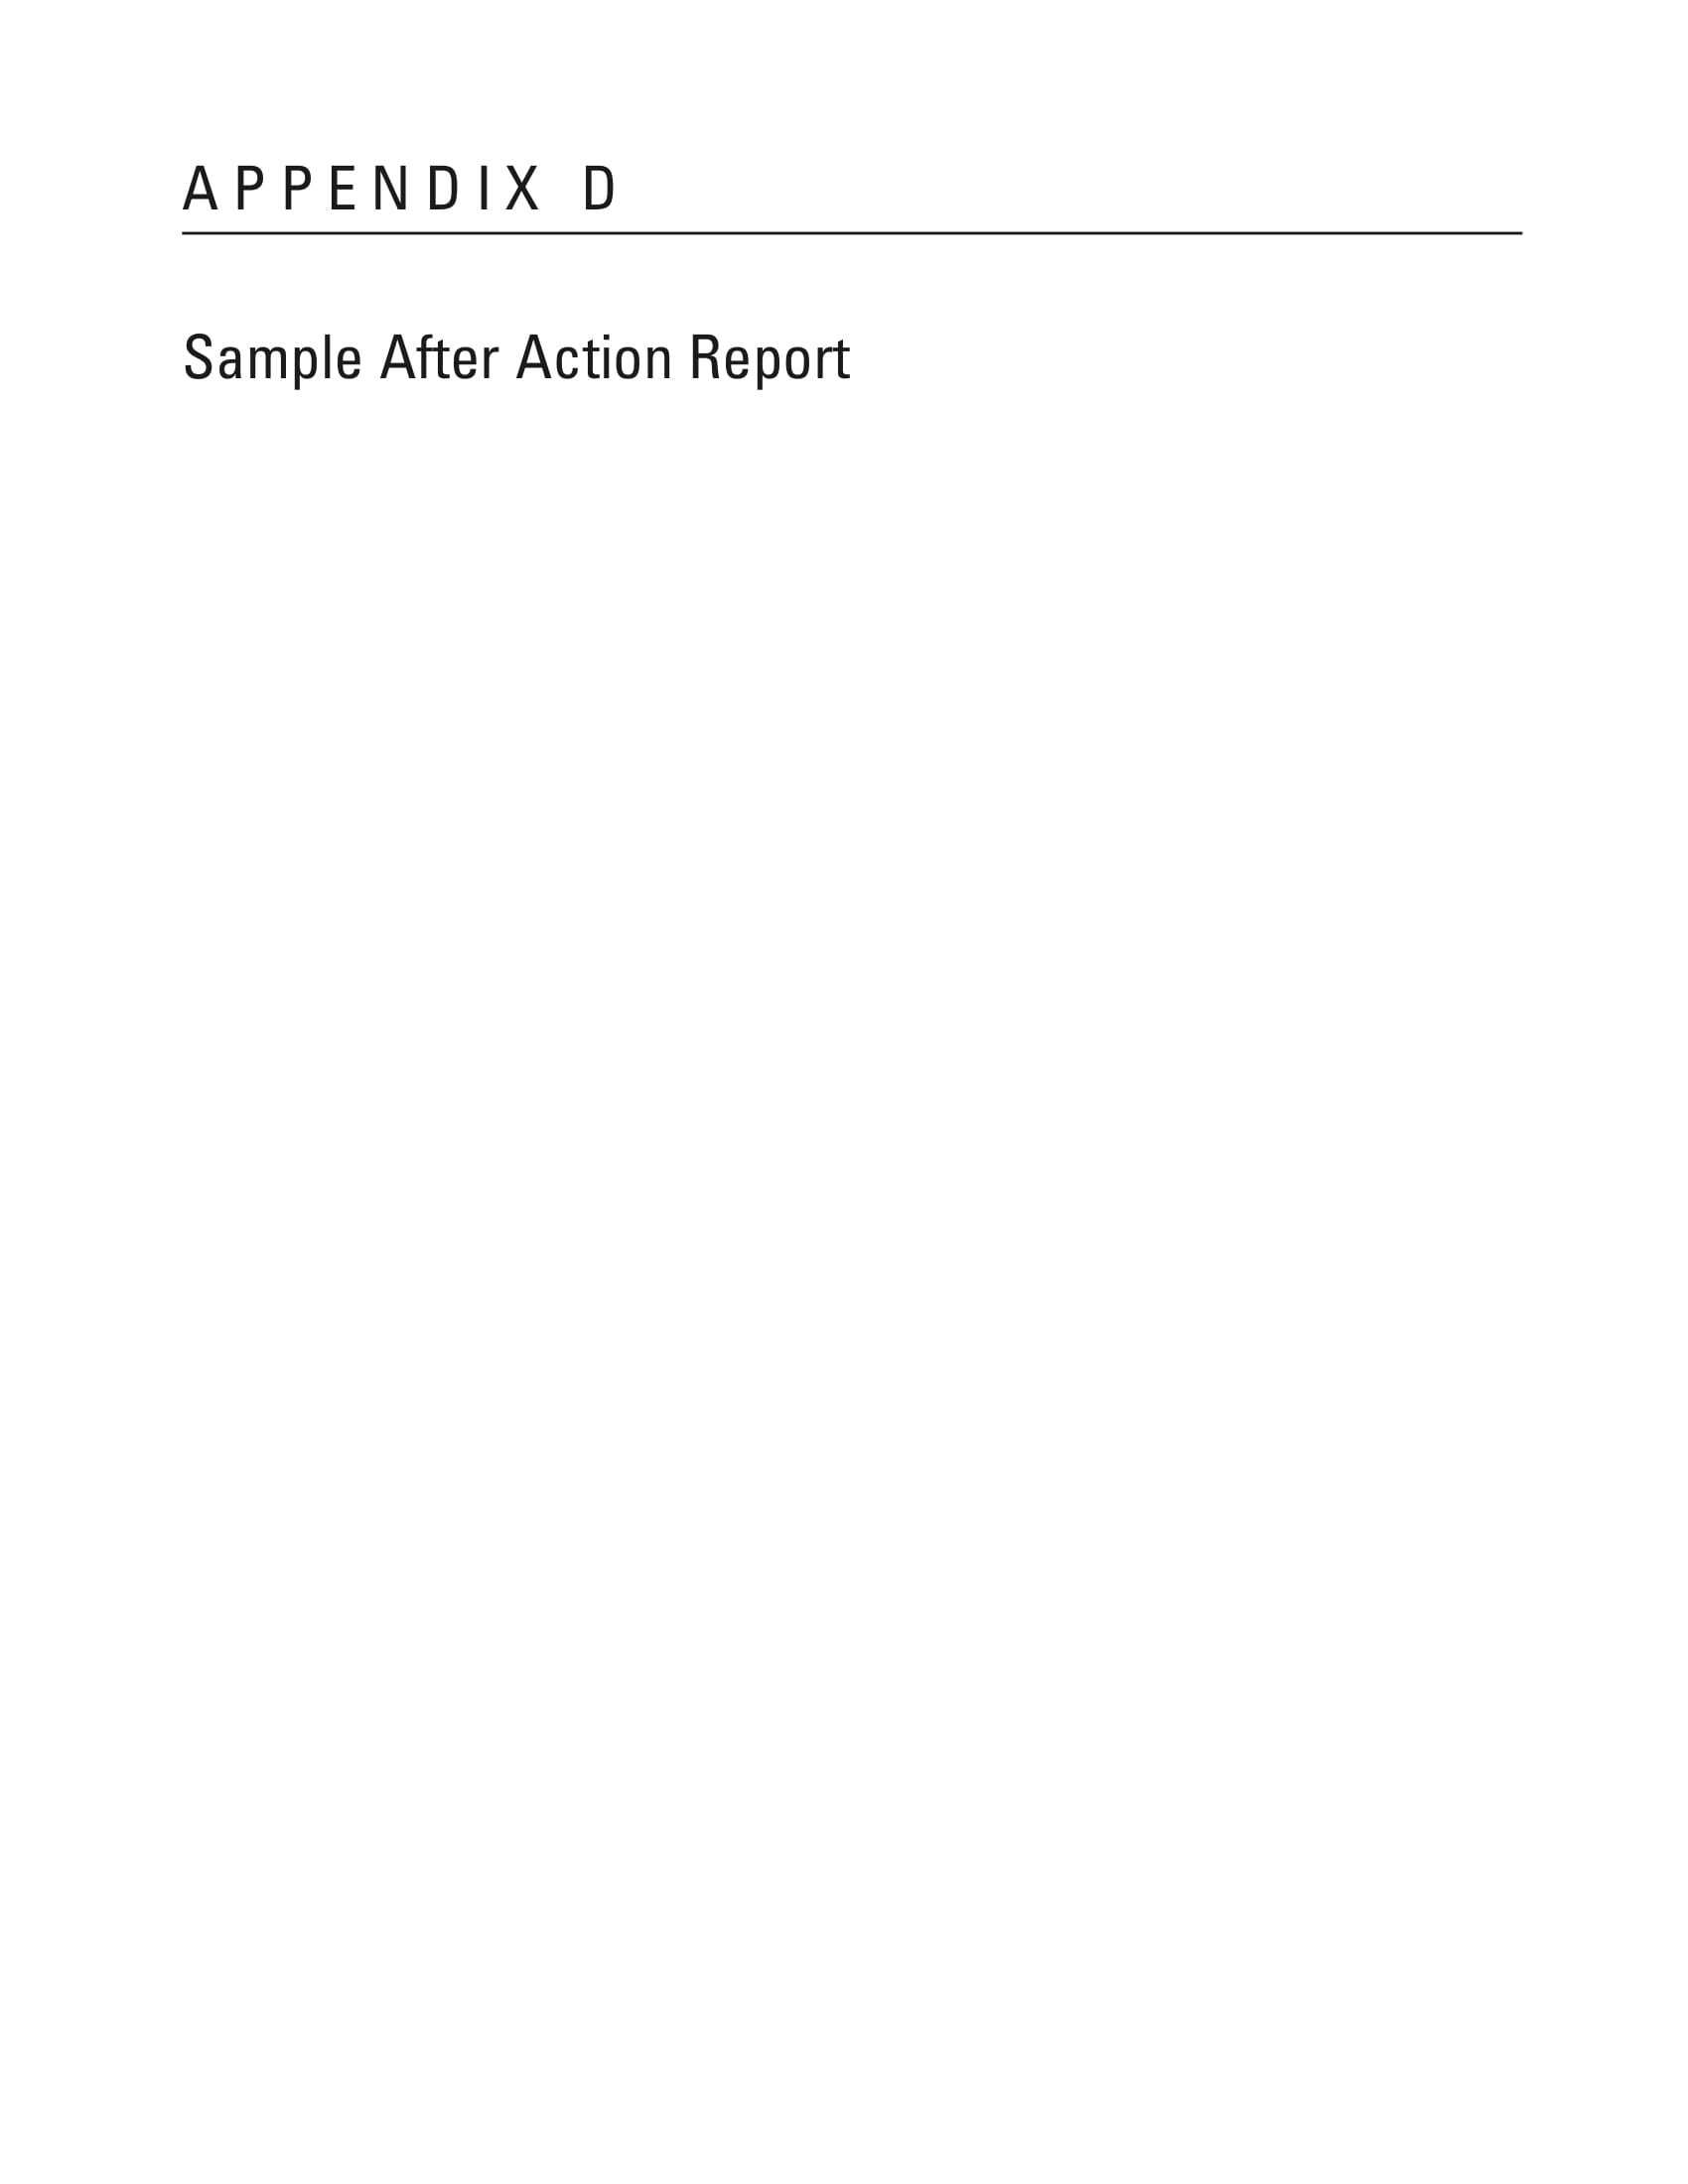 Rma Report Template Awesome Simple After Action Weekly For Rma Report Template